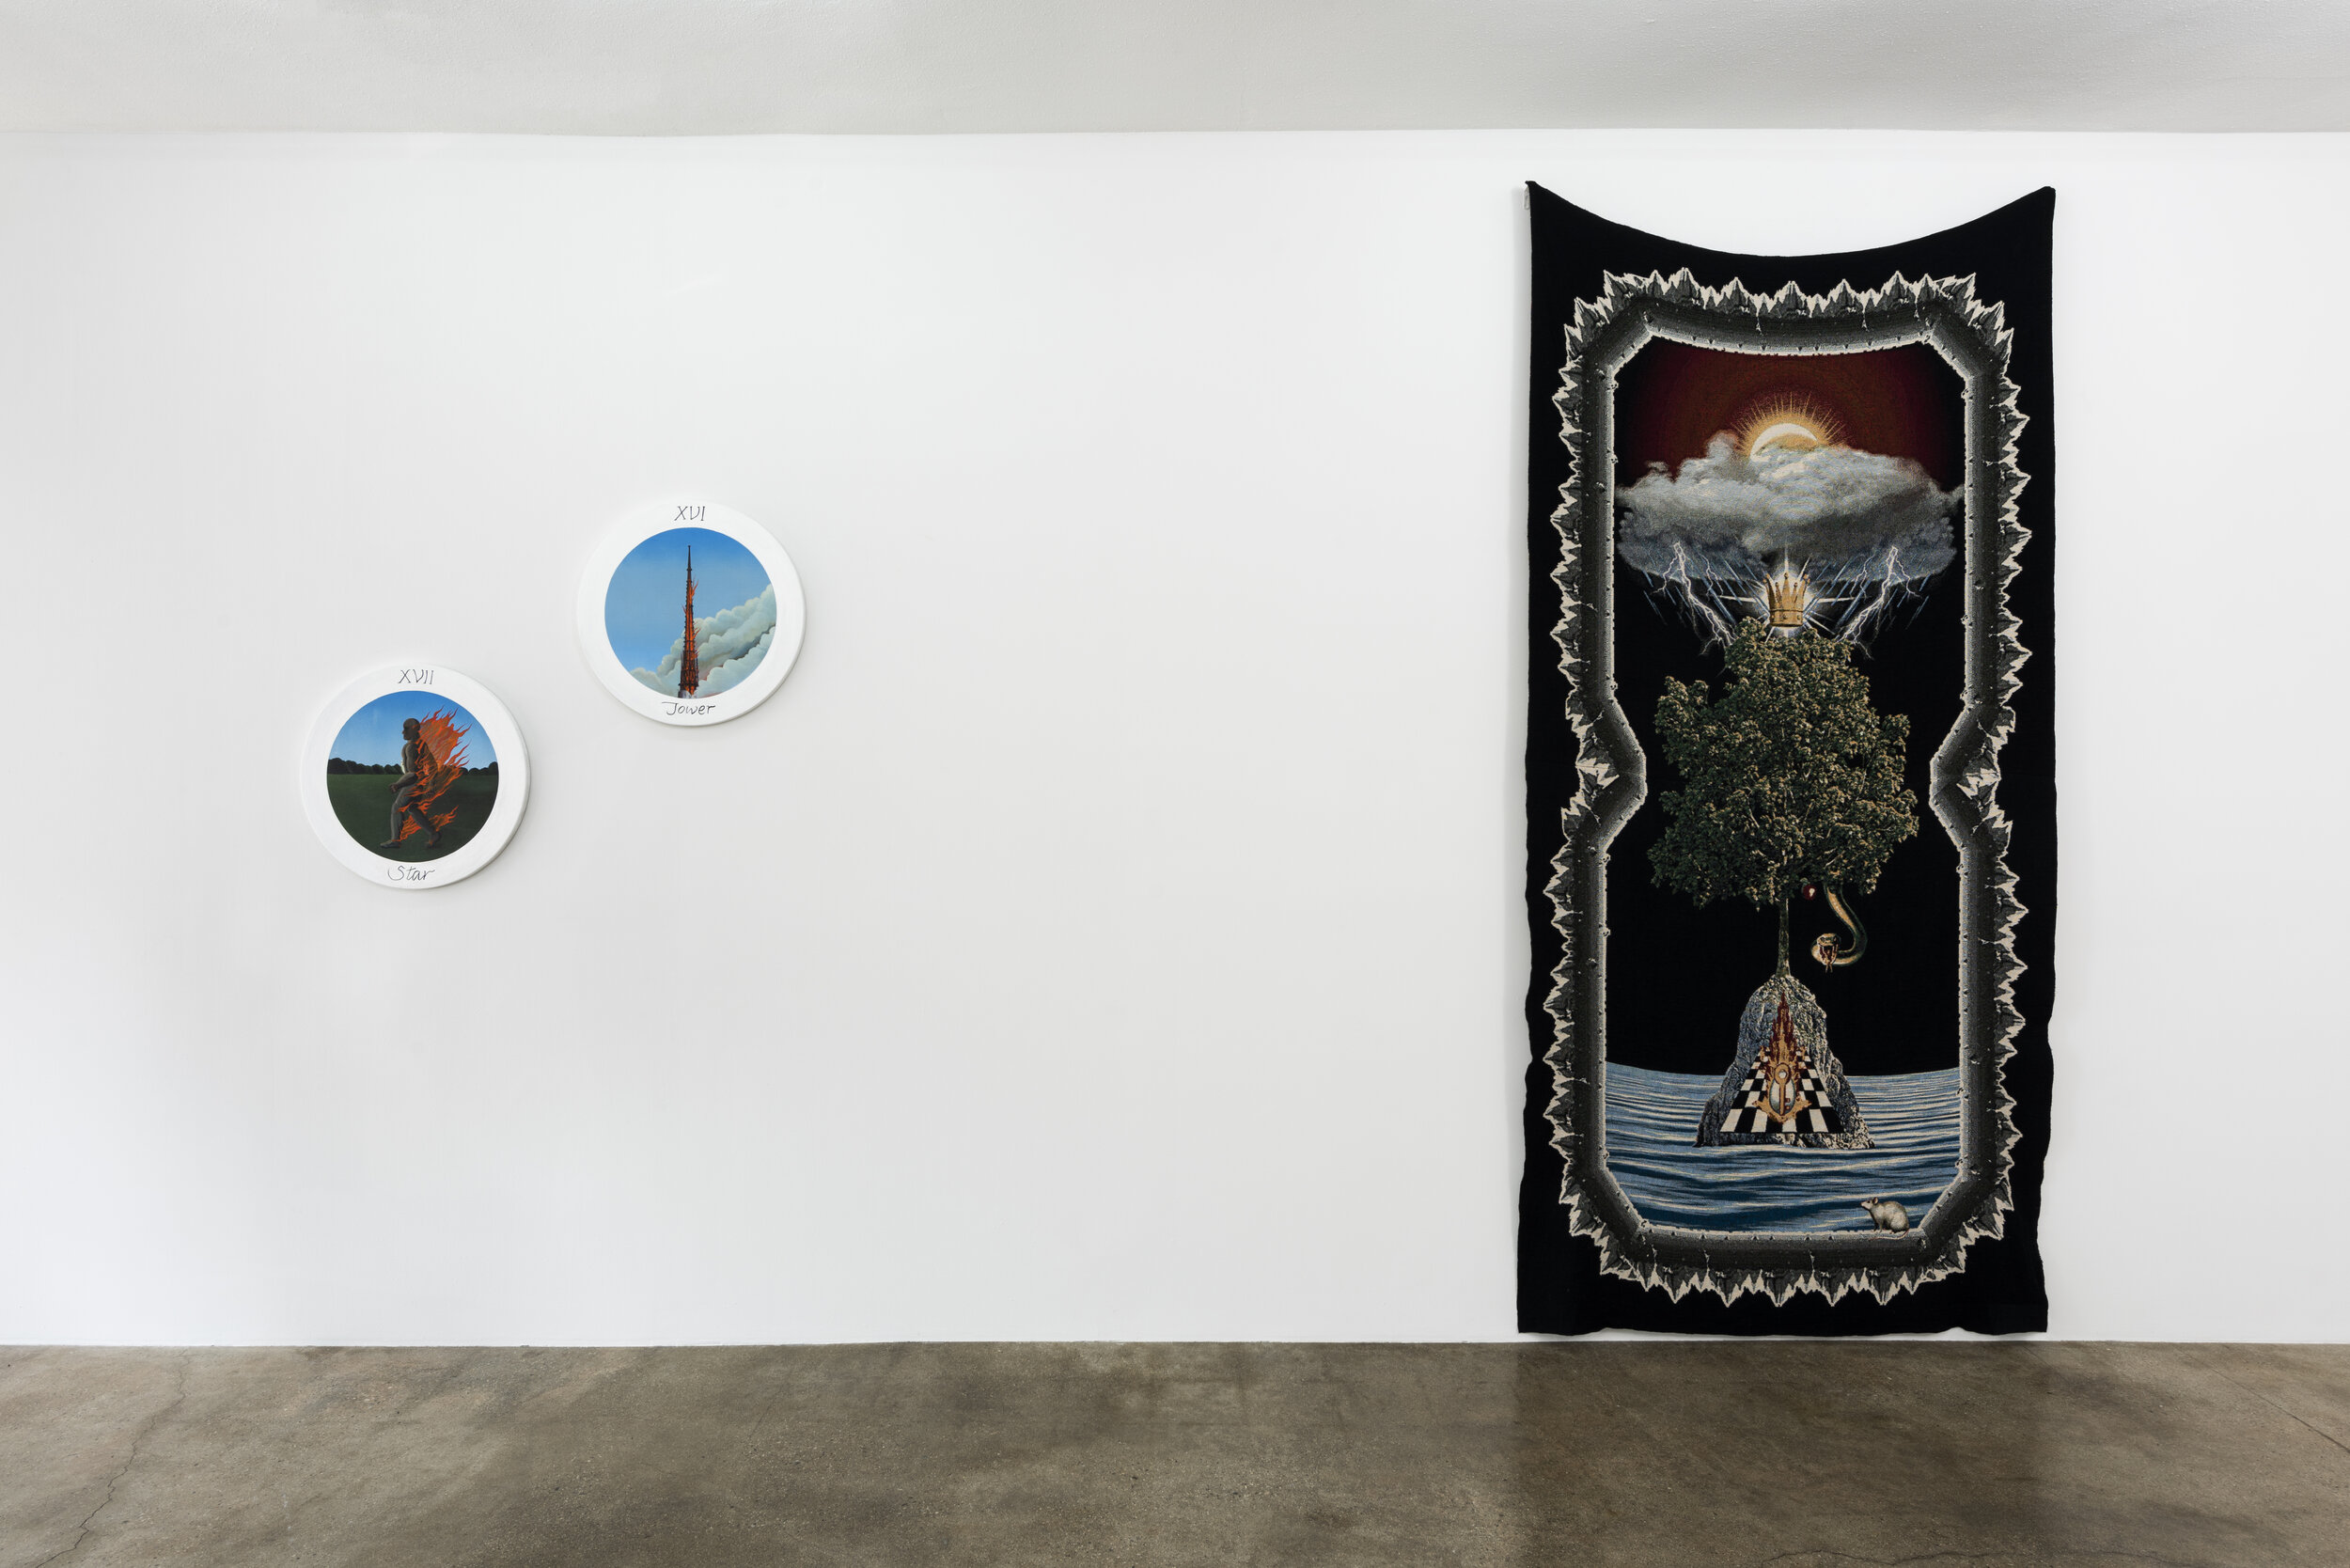  Installation view of  ”i’ll see you in the ether”  curated by Jonny Negron  November 10 - December 20, 2019  Photo by Ruben Diaz   Link to press release  